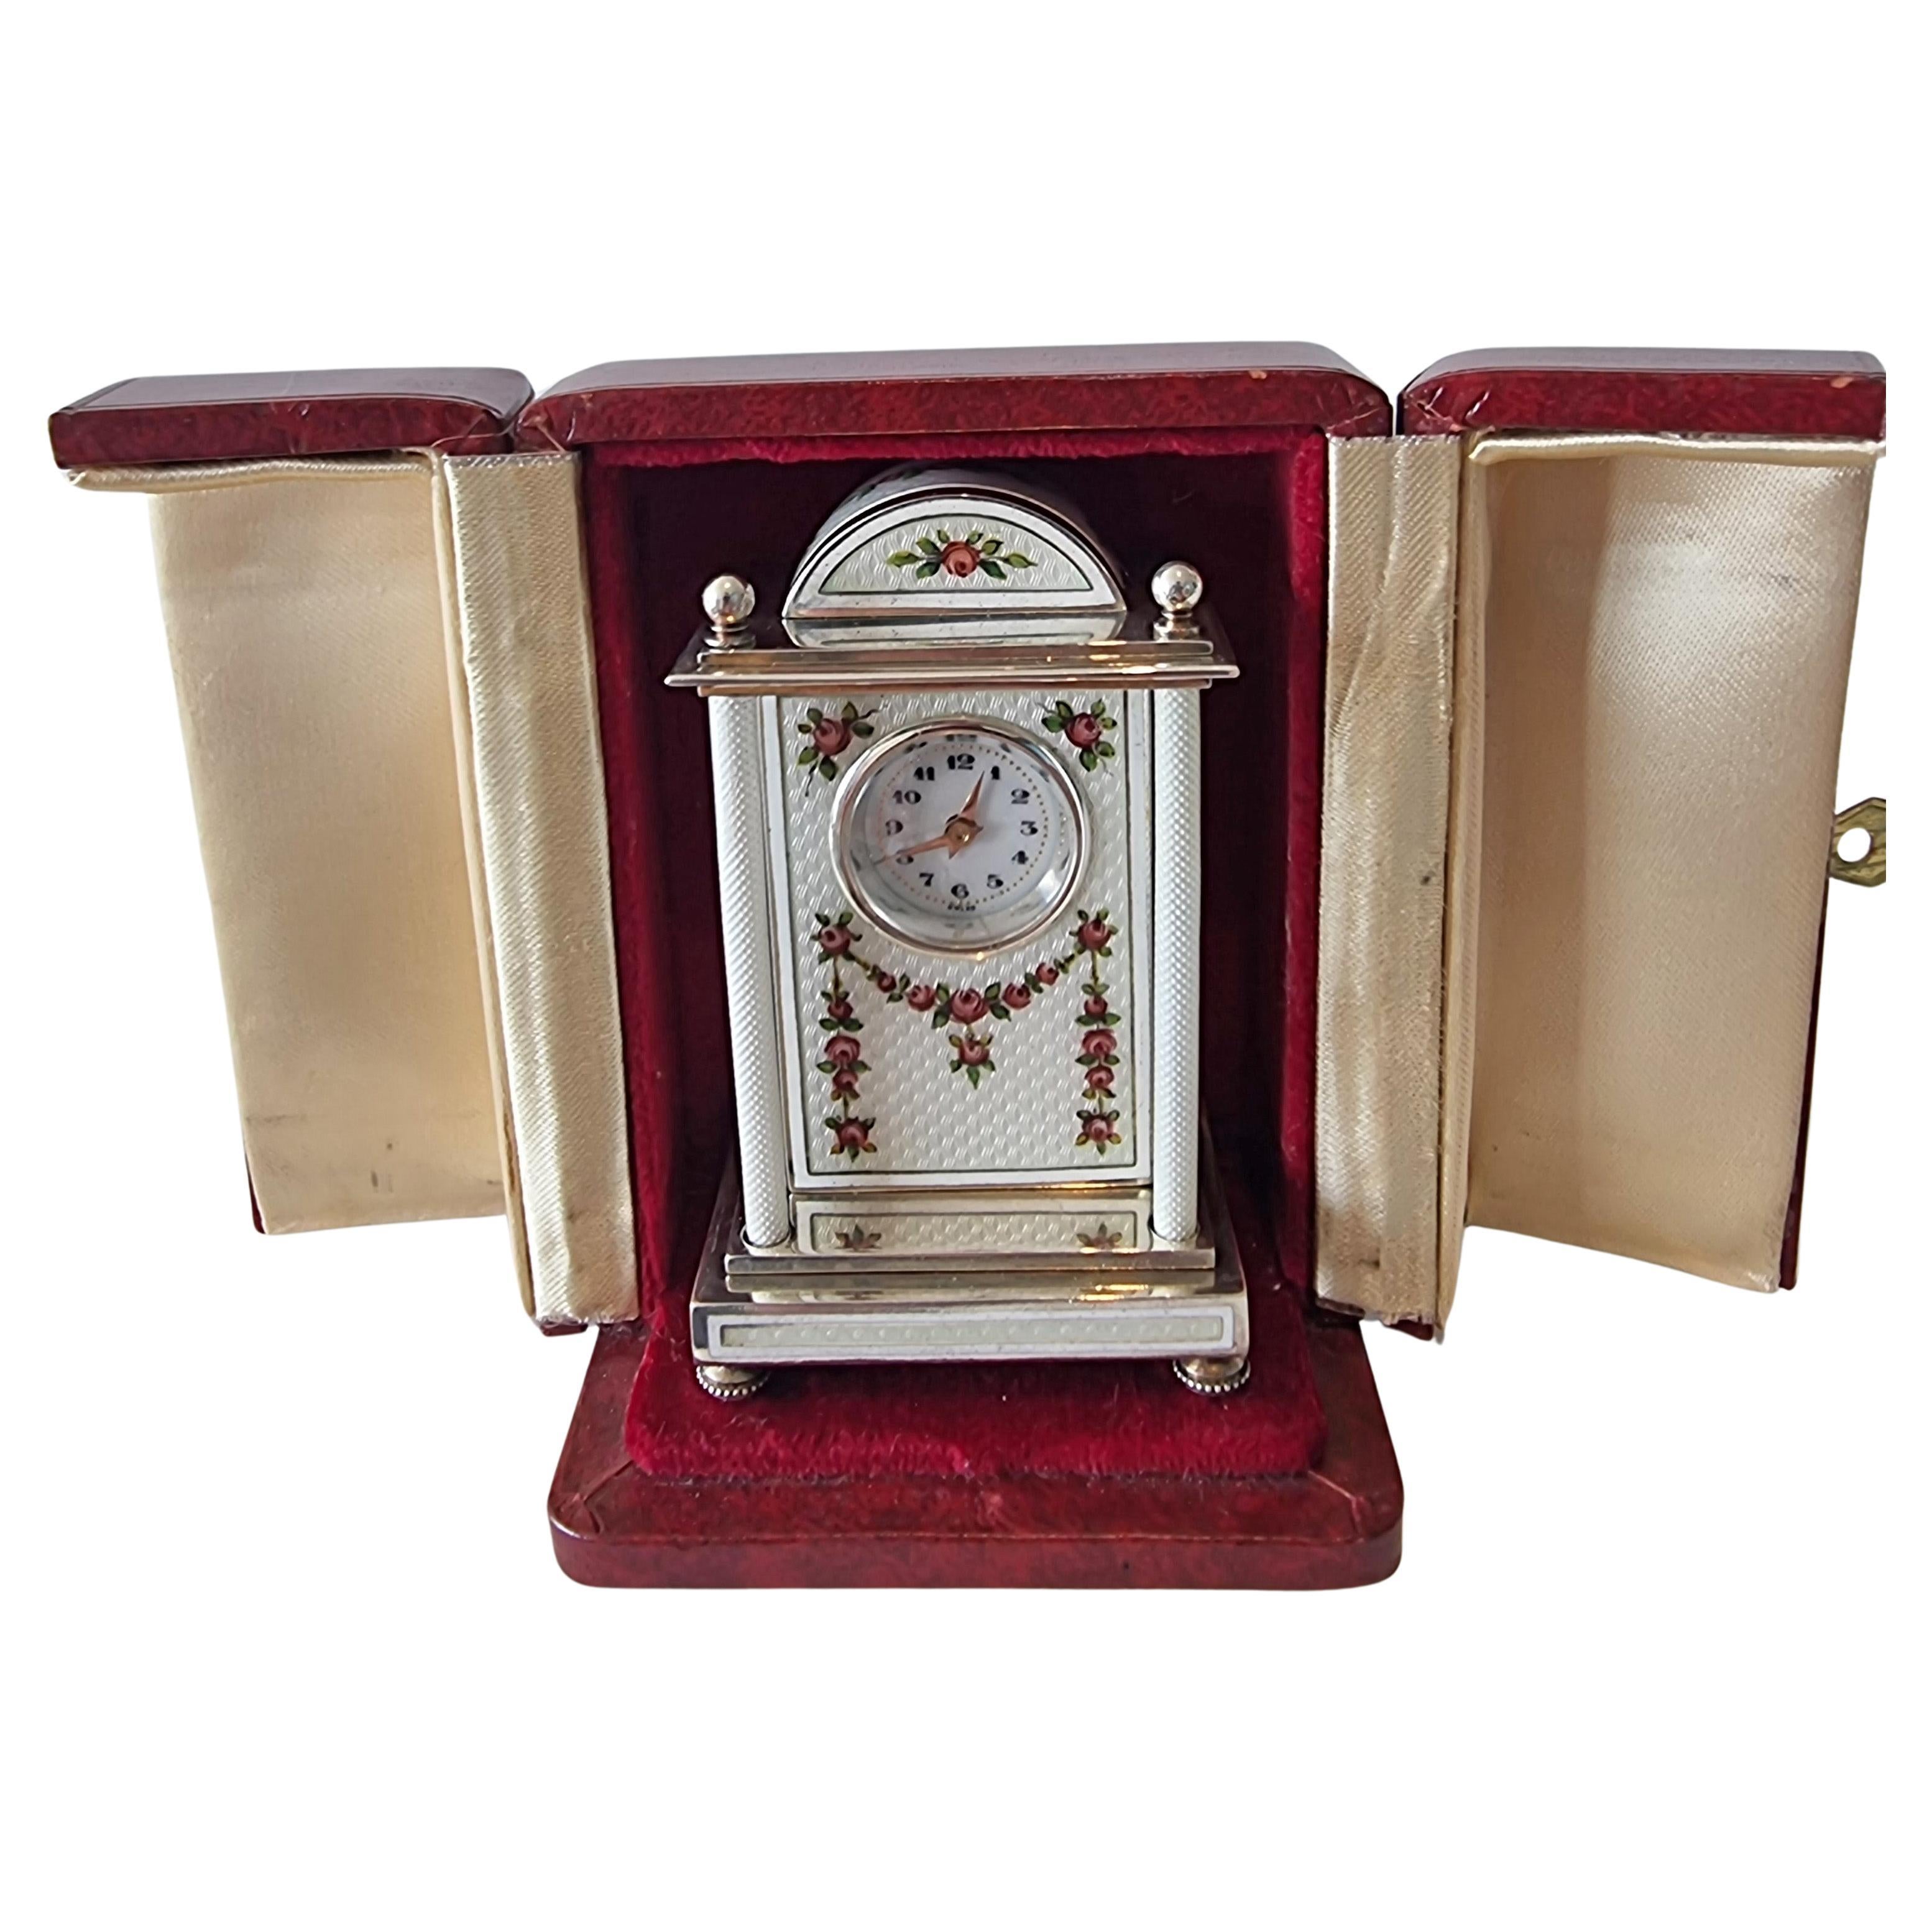 A Silver and White Guilloche enamel Carriage or boudoir Clock